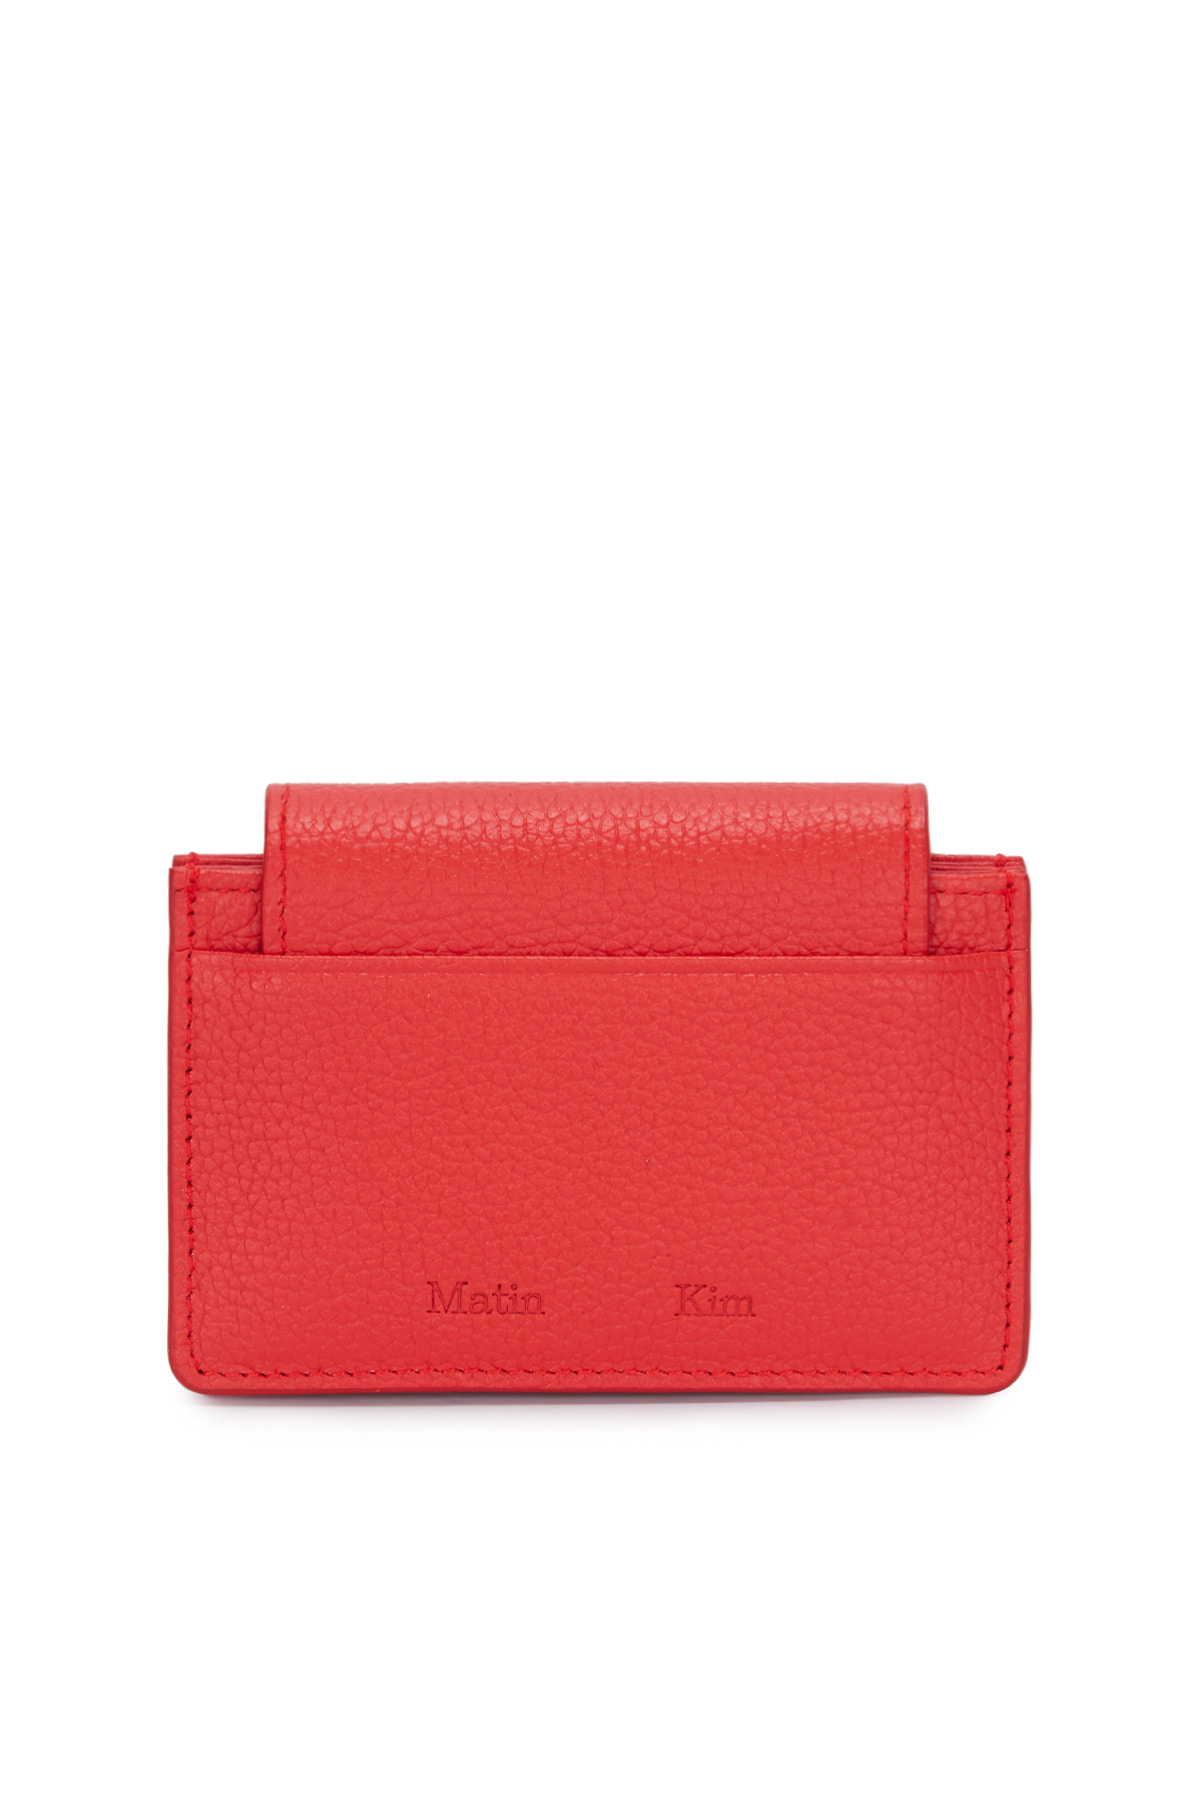 ACCORDION WALLET IN RED